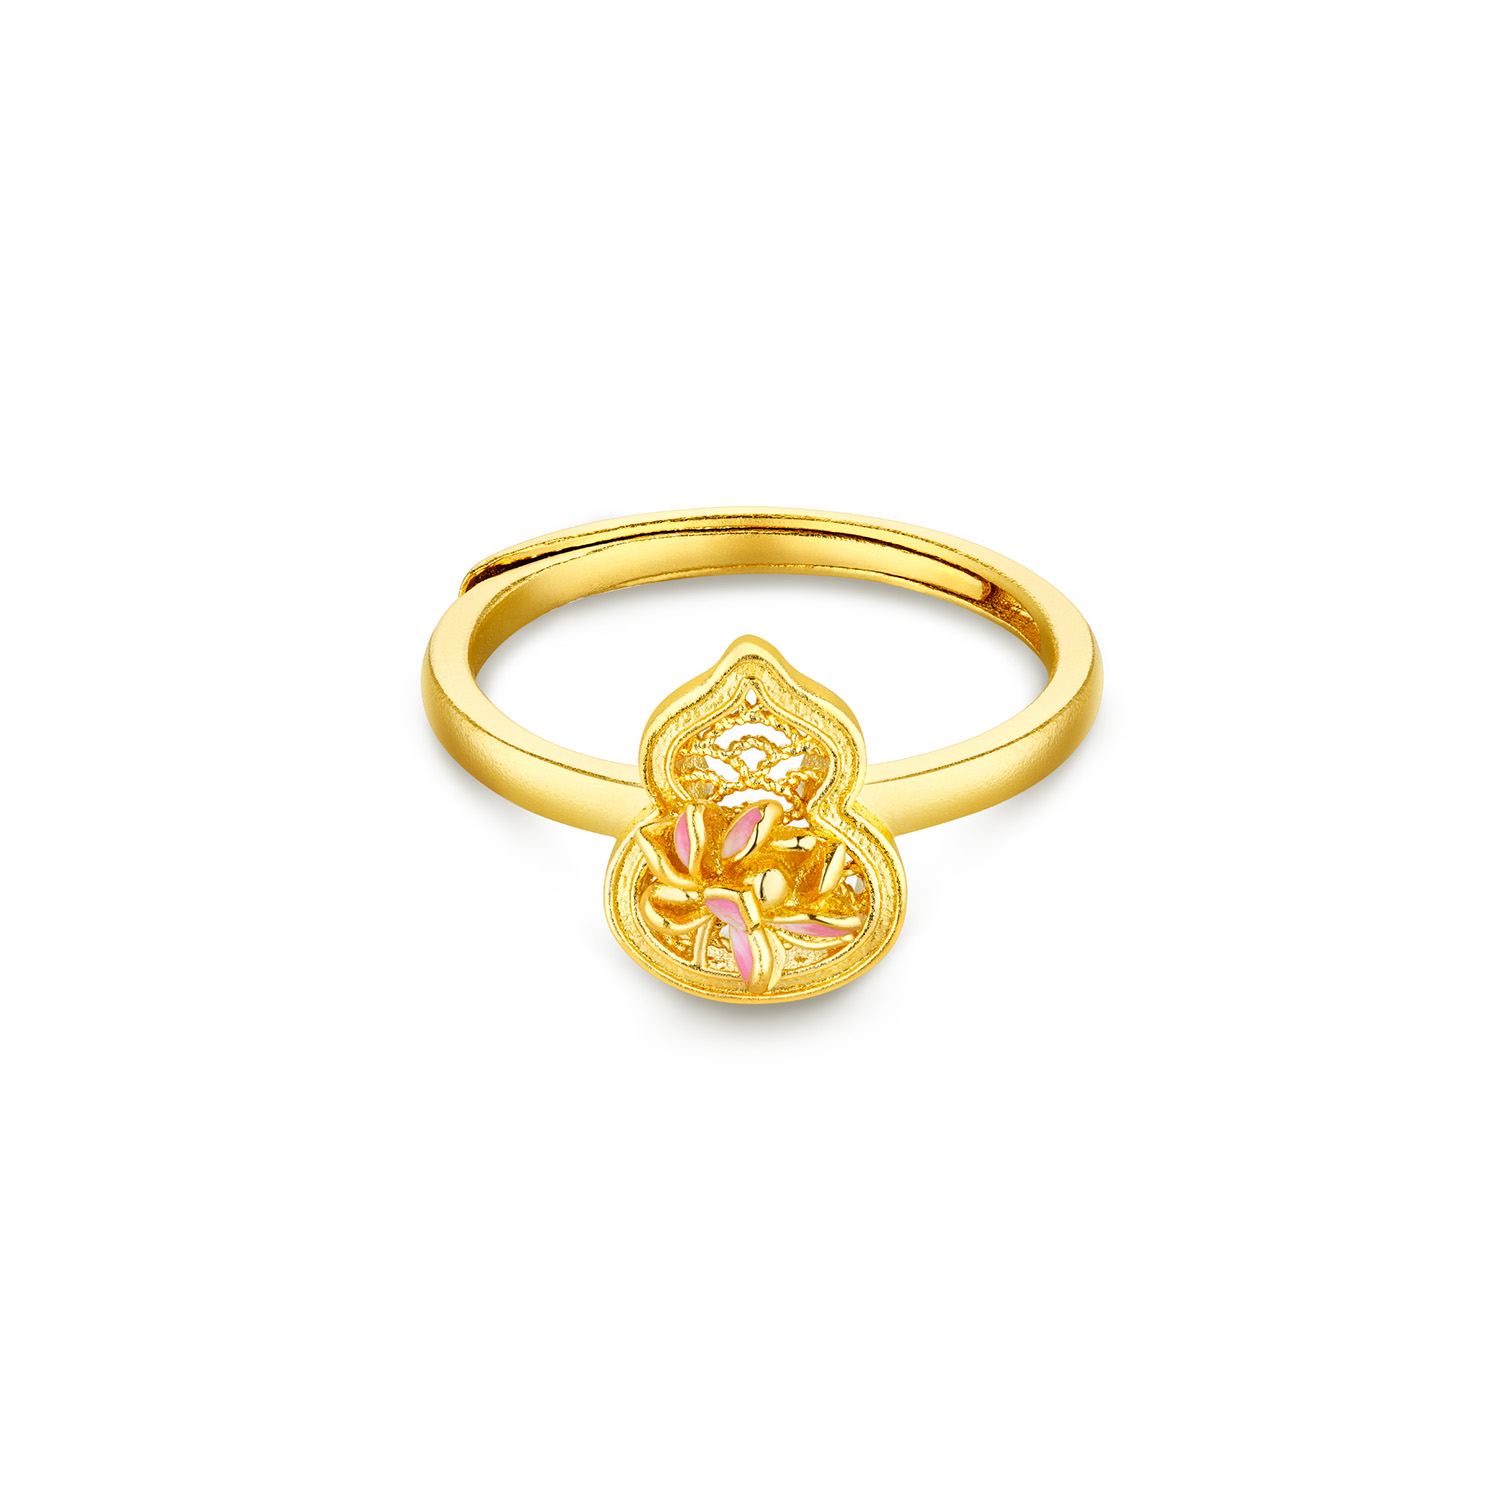 Heirloom Fortune - Charm of Song Dynasty Collection "Floral Gourd" Gold Ring